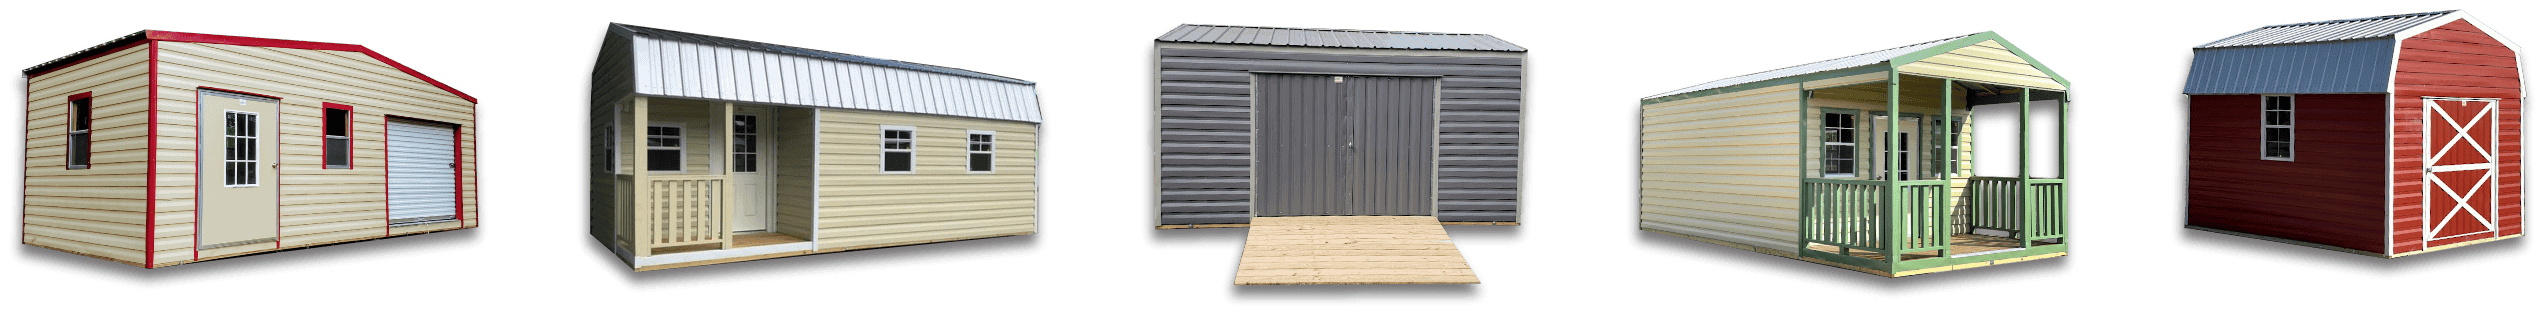 Get your hands on the best 8x16 sheds for sale. Check out our selection of portable buildings, outdoor storage buildings, and storage sheds. Robin Sheds, your reliable shed dealer, offers various shed styles perfect for your storage needs. Visit us and get started today!